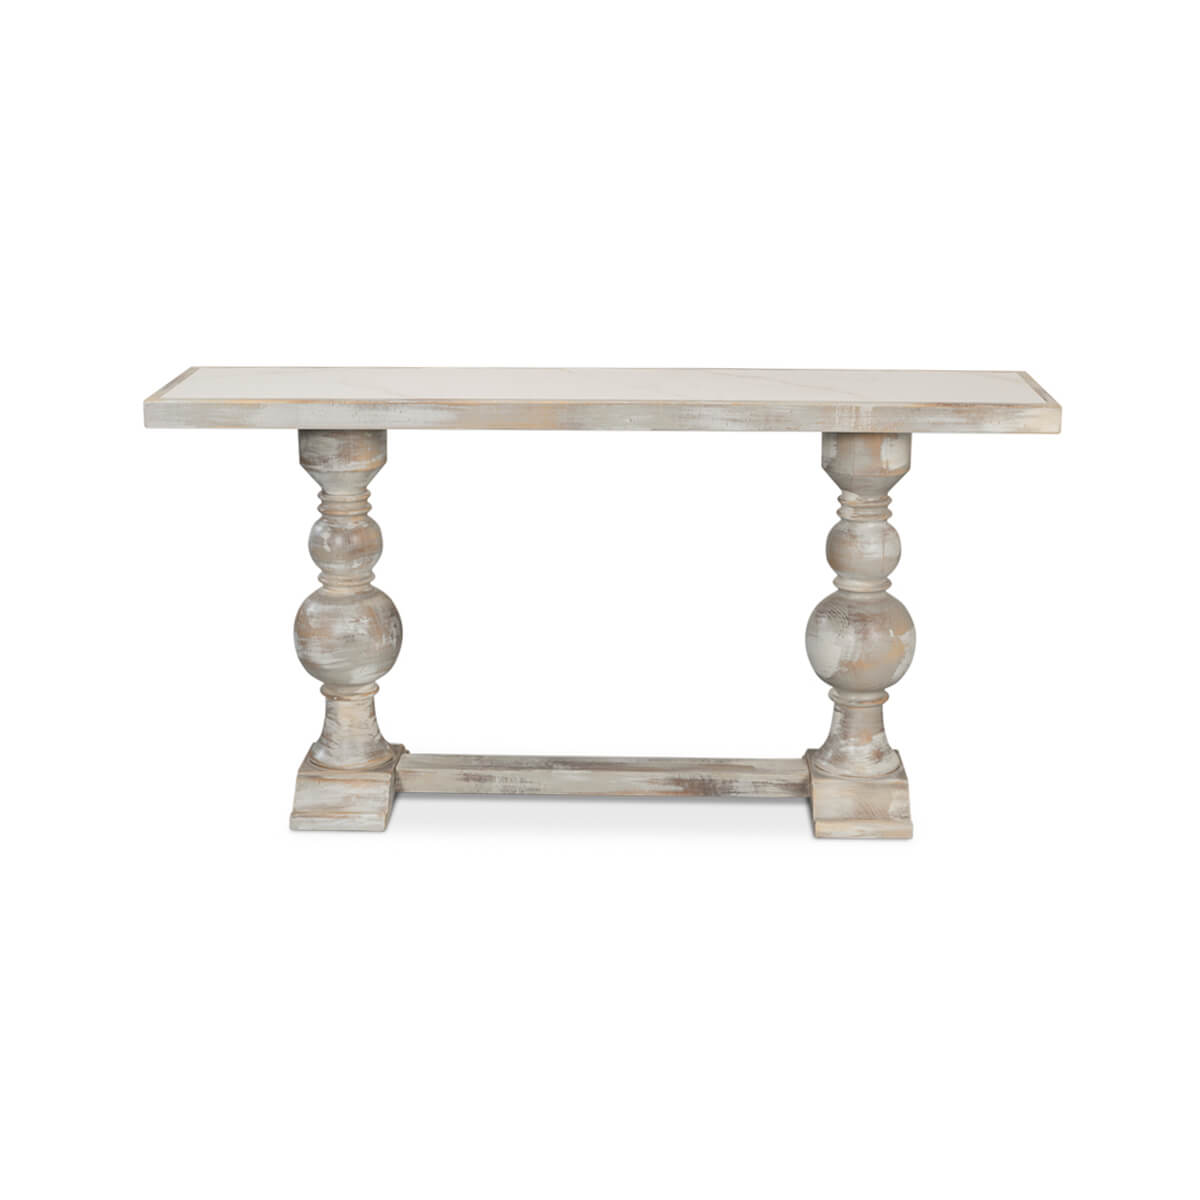 Baroque Style Painted Console Table - English Georgian America